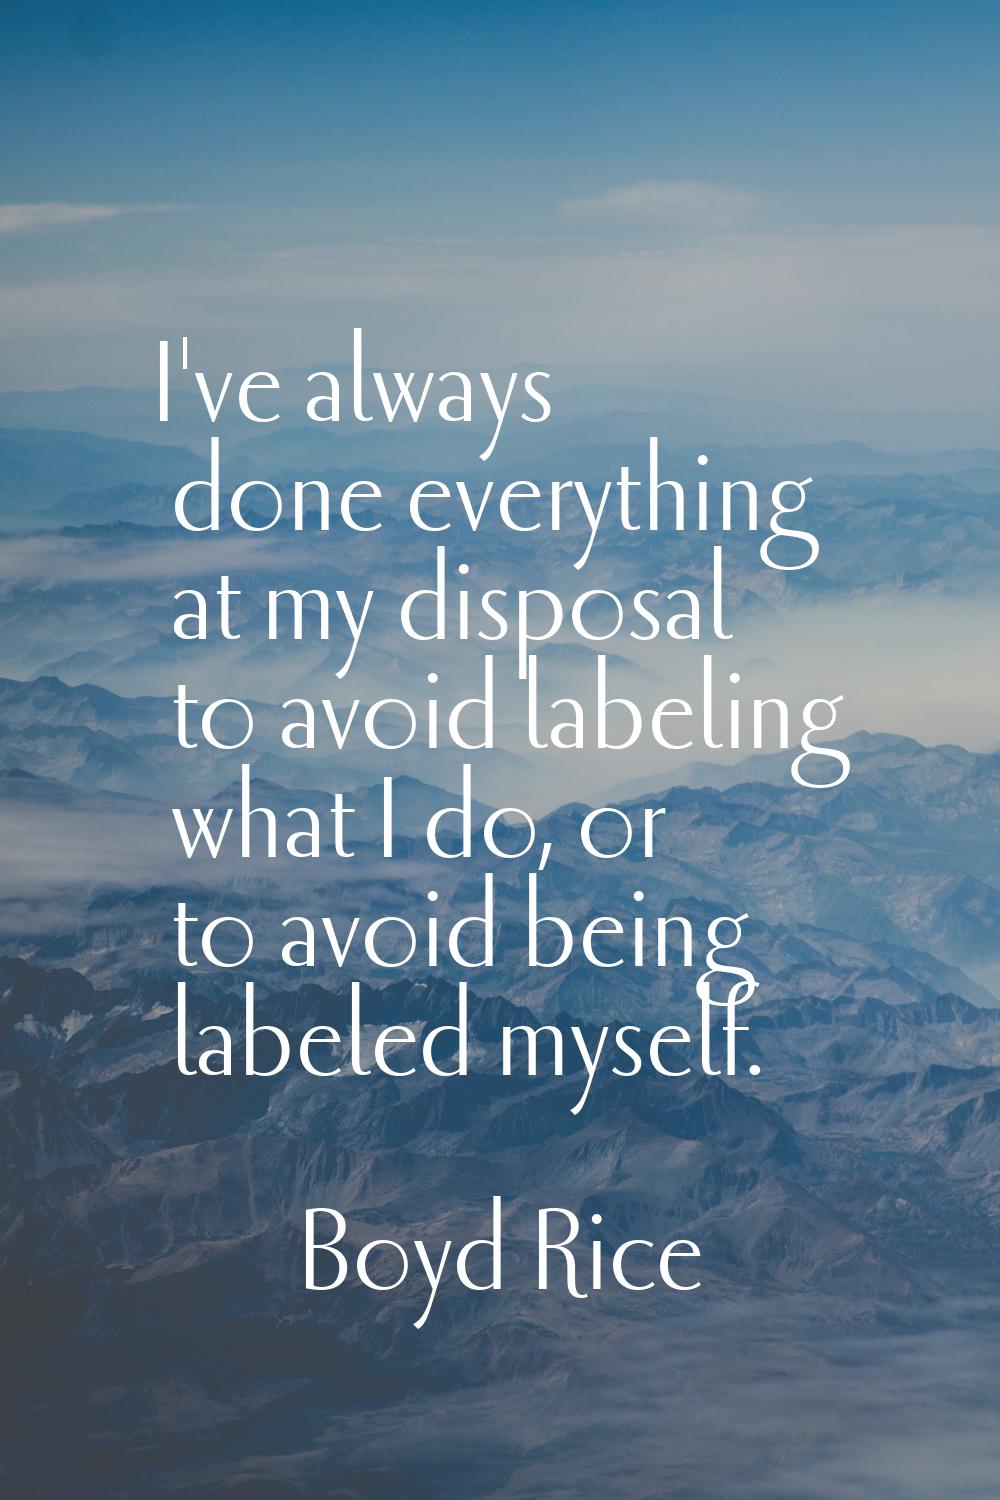 I've always done everything at my disposal to avoid labeling what I do, or to avoid being labeled m